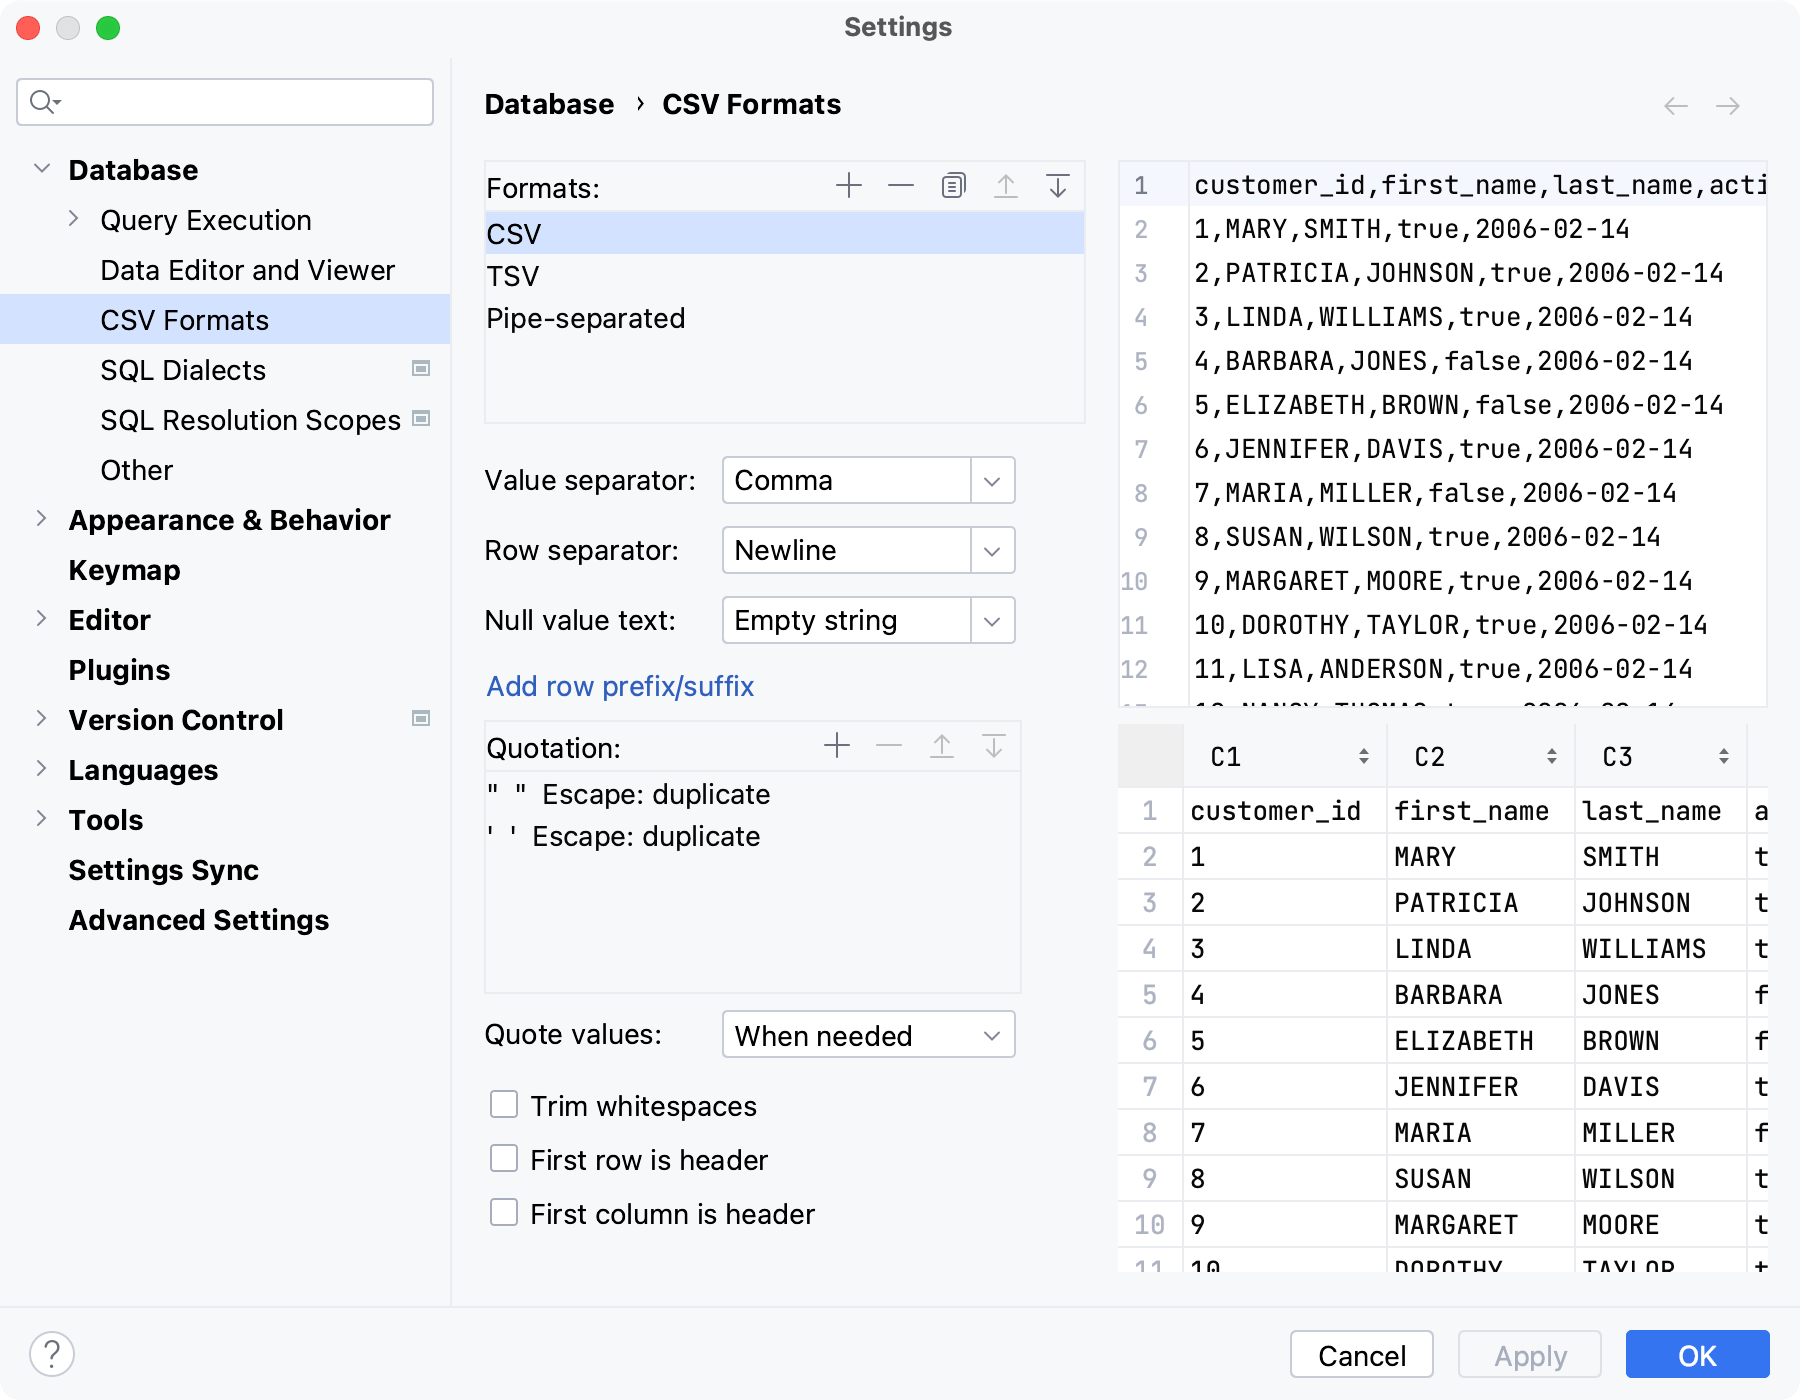 The CSV Formats menu of the Database settings